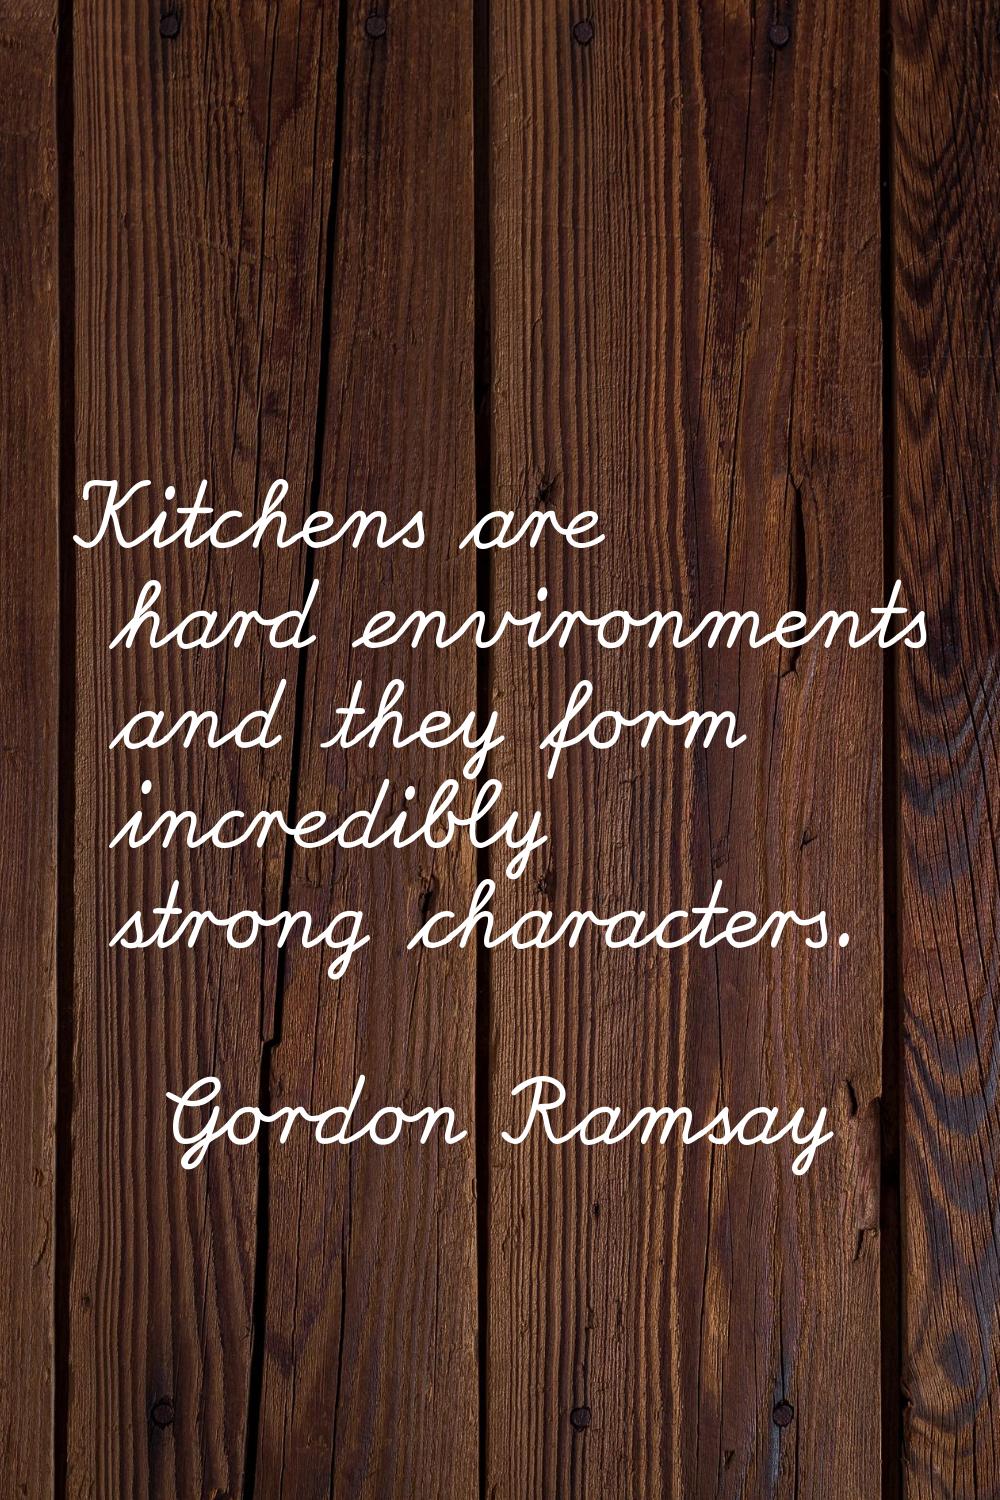 Kitchens are hard environments and they form incredibly strong characters.